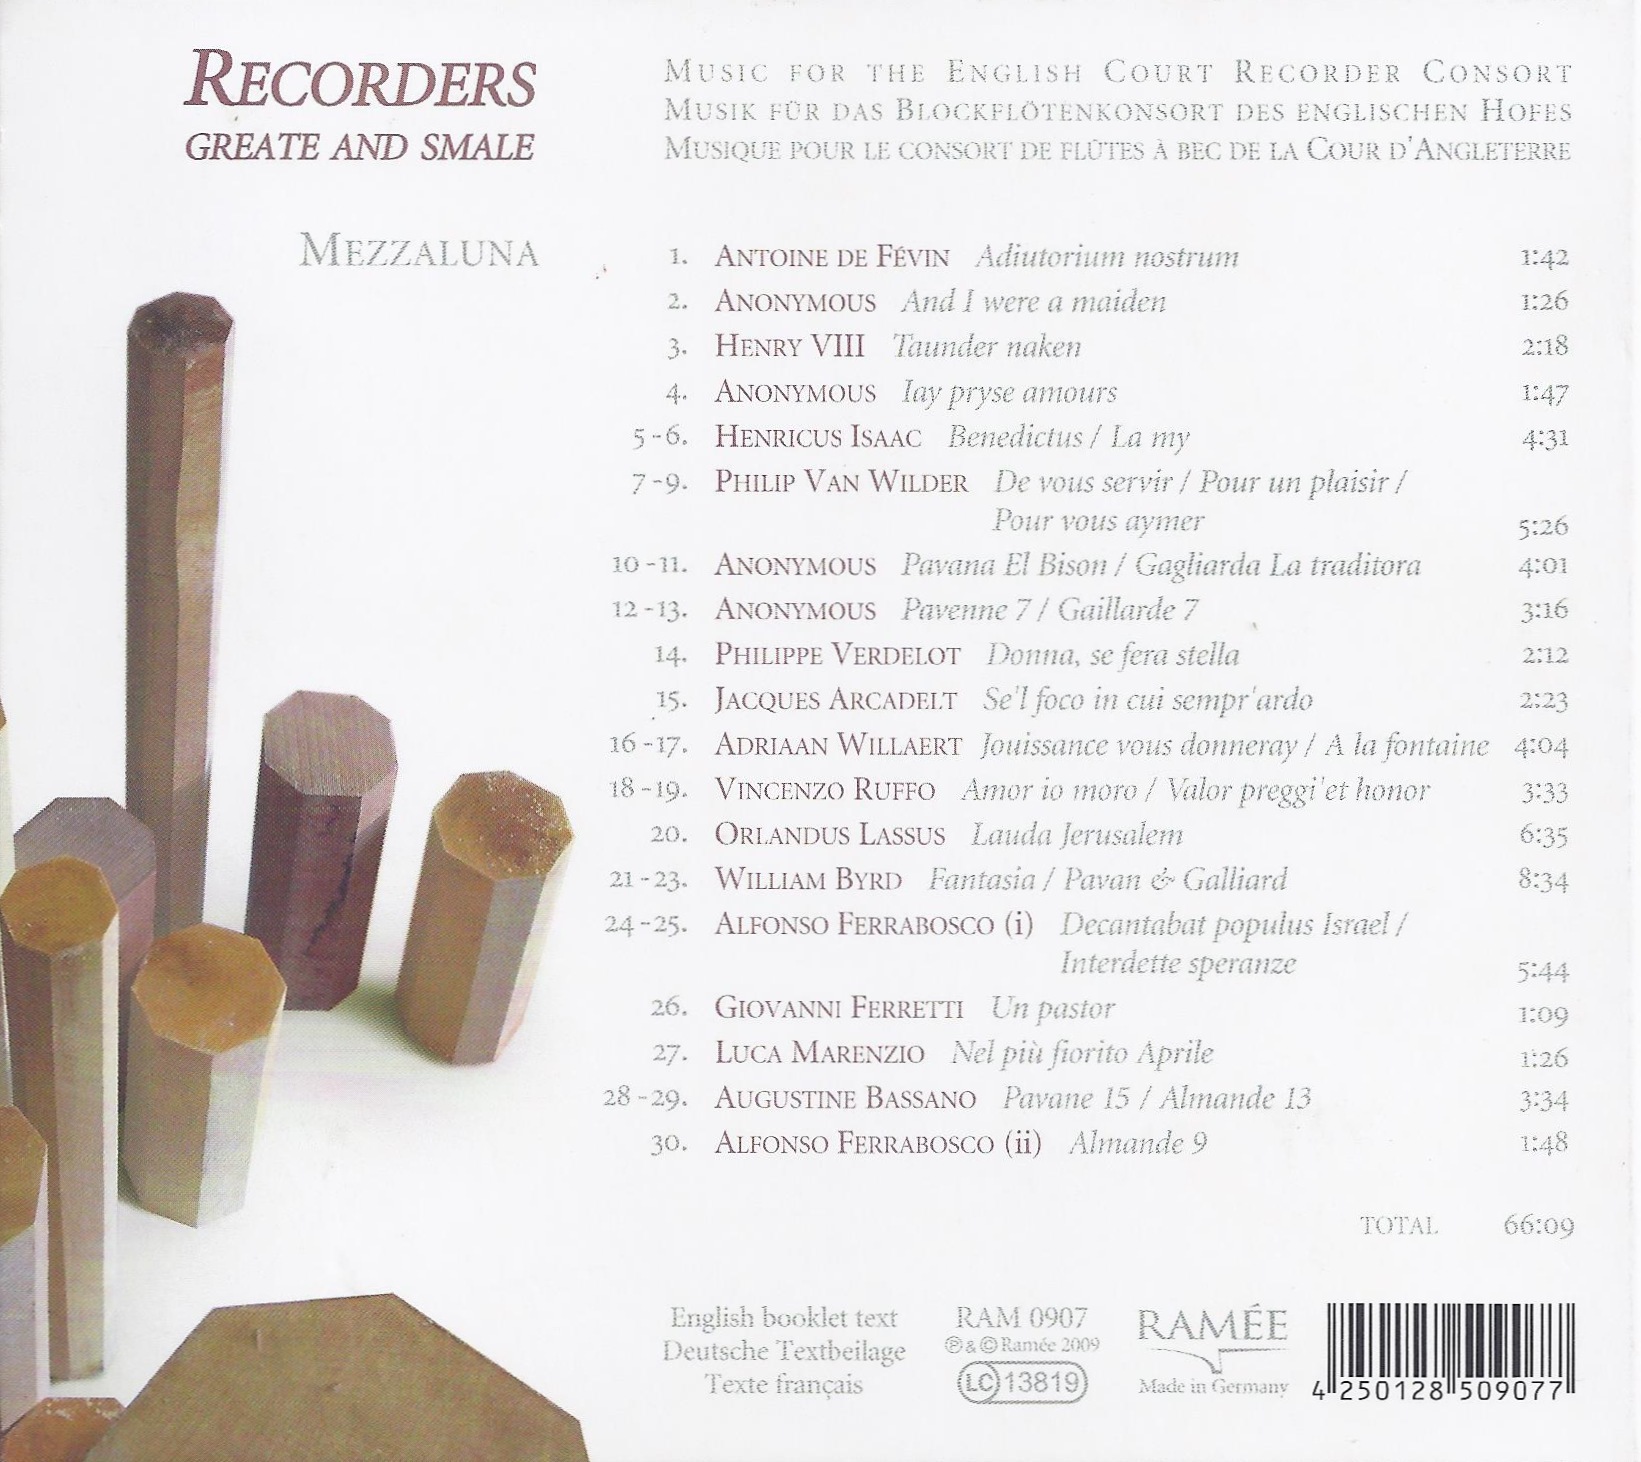 Music for the English Court Recorder Consort - slide-1